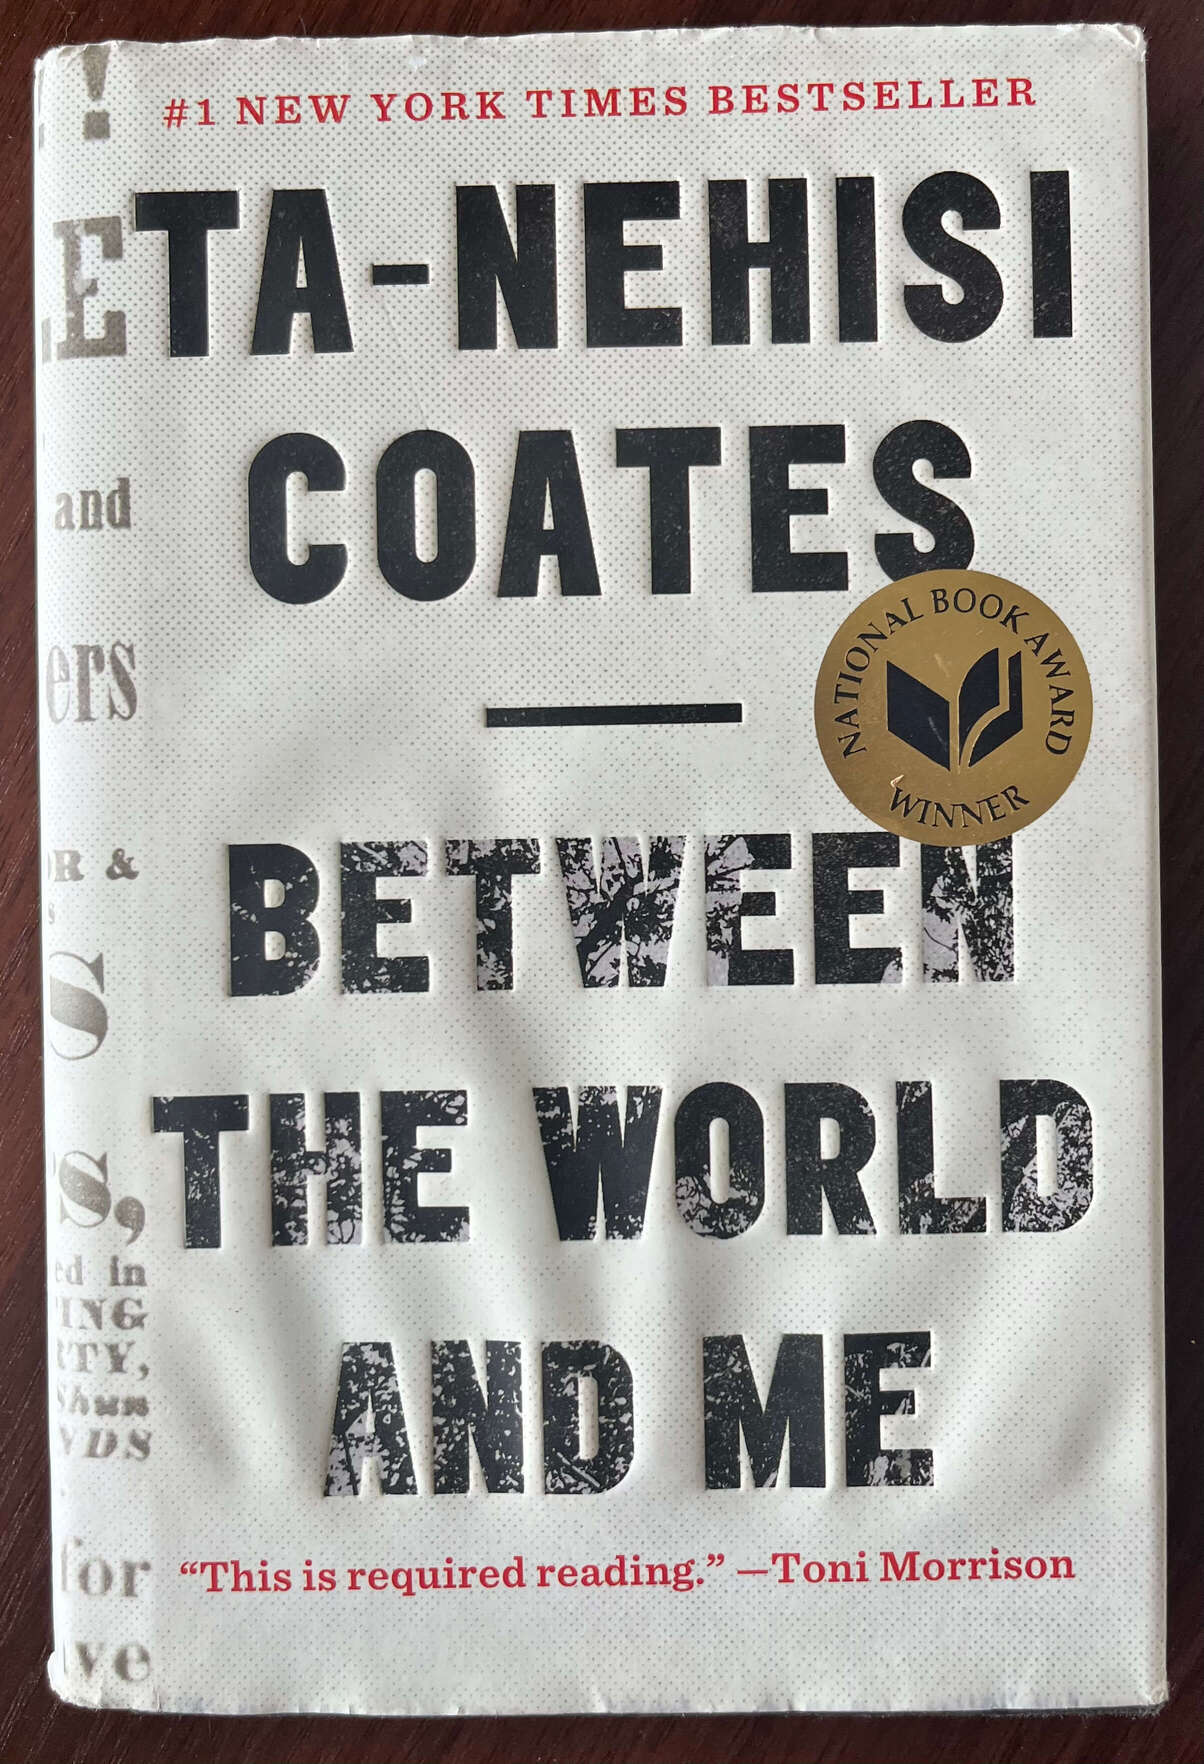 “Between the World and Me” by Ta-Nehisi Coates.”